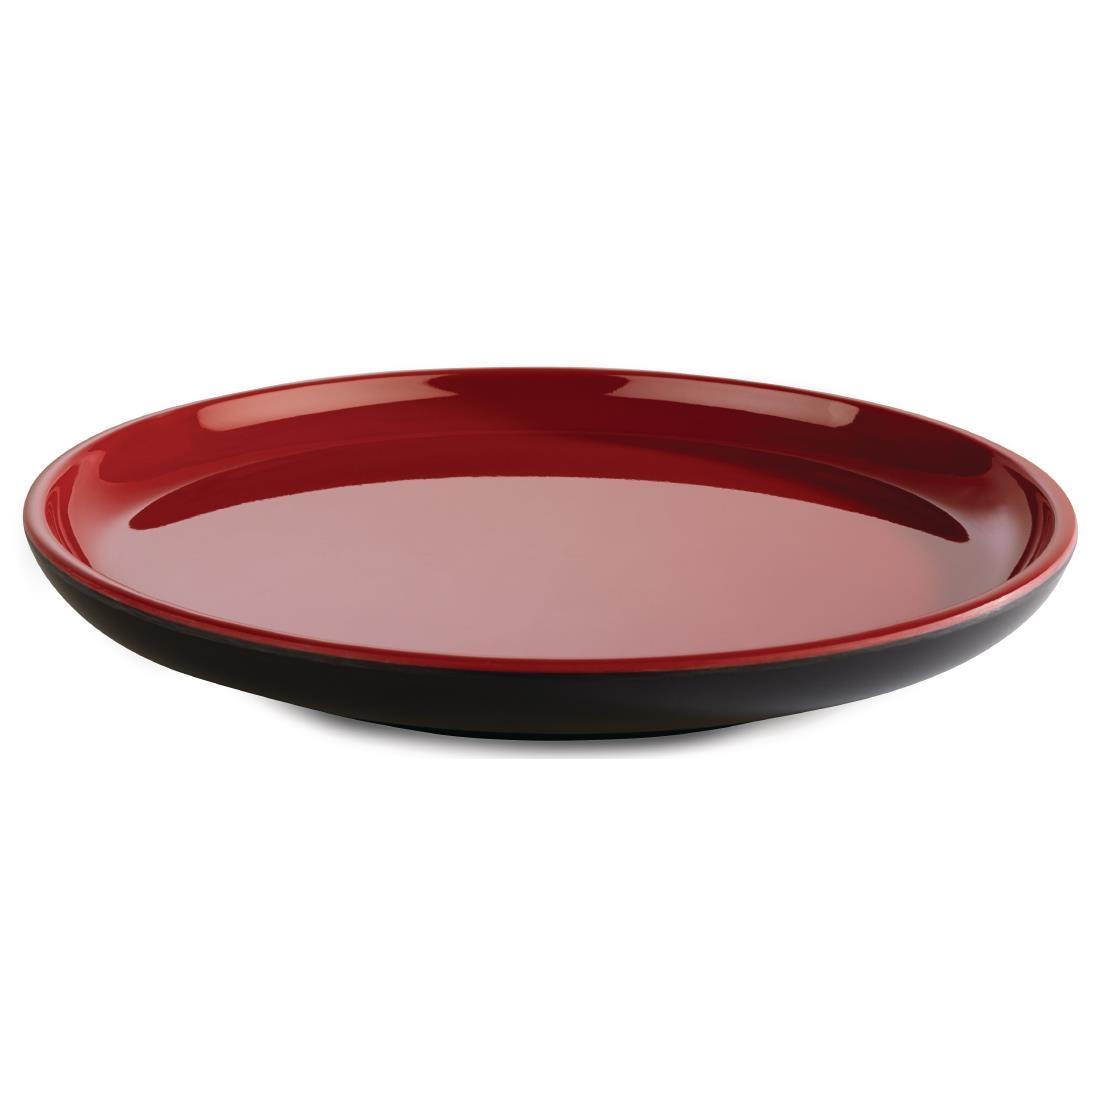 APS Asia+ Plate Red 240mm - Each - DW038 - 1